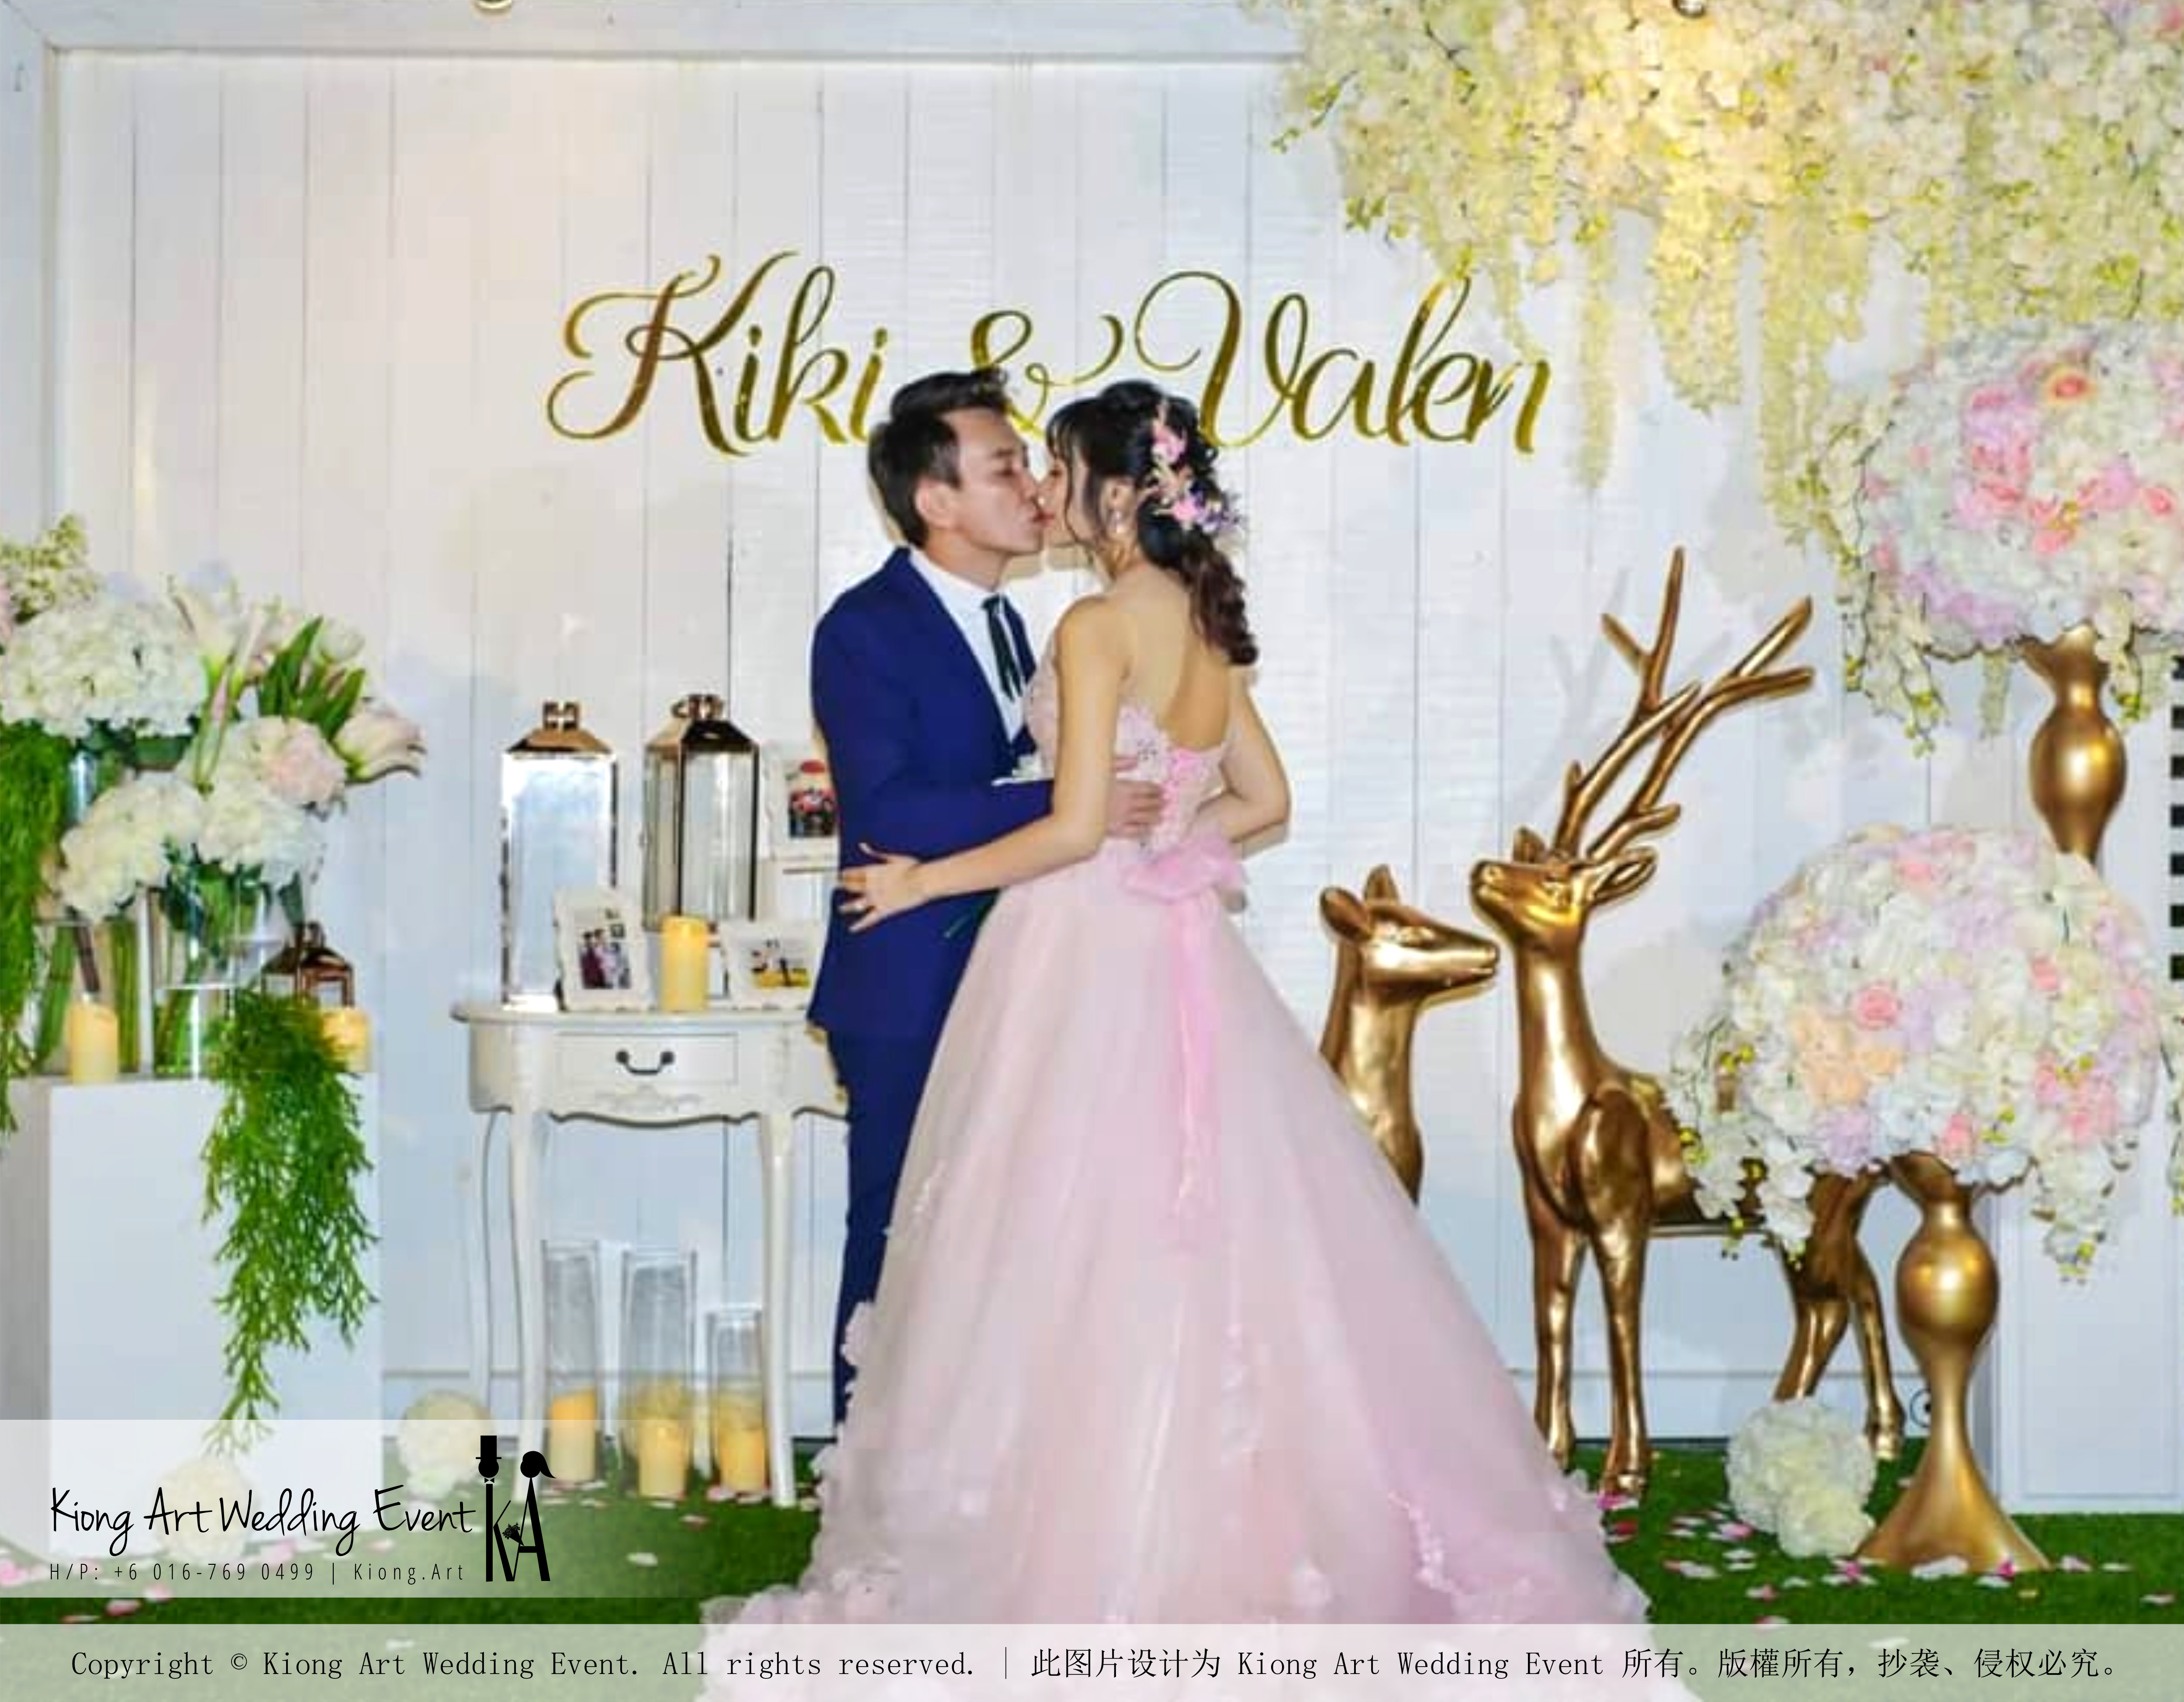 Kiong Art Wedding Event Kuala Lumpur Malaysia Wedding Decoration One-stop Wedding Planning Warm Outdoor Romantic Style Theme Kluang Container Swimming Pool Homestay A07-A01-49